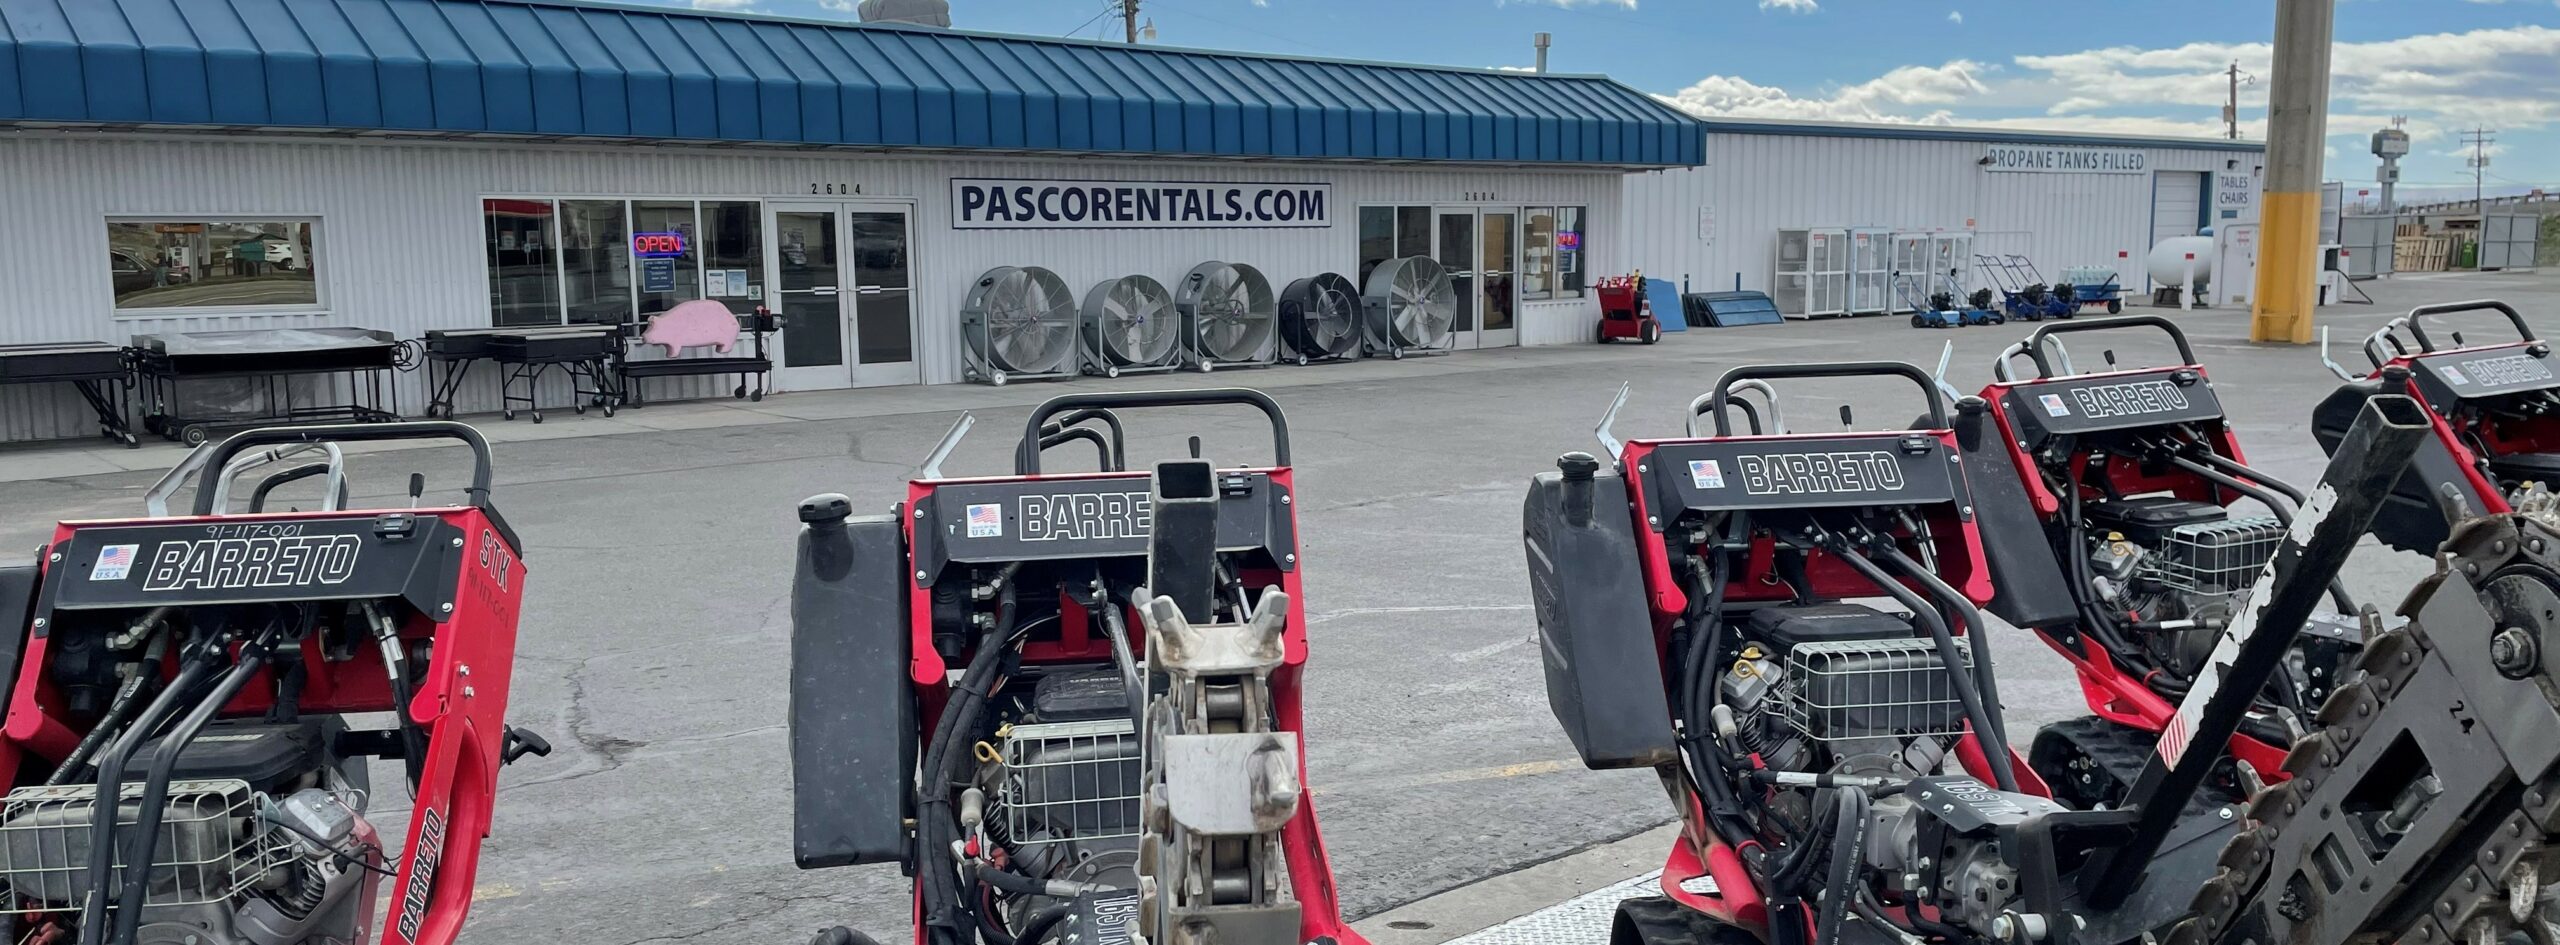 The storefront of your local rental store as seen from Court St. - come visit us at Pasco Rentals today!